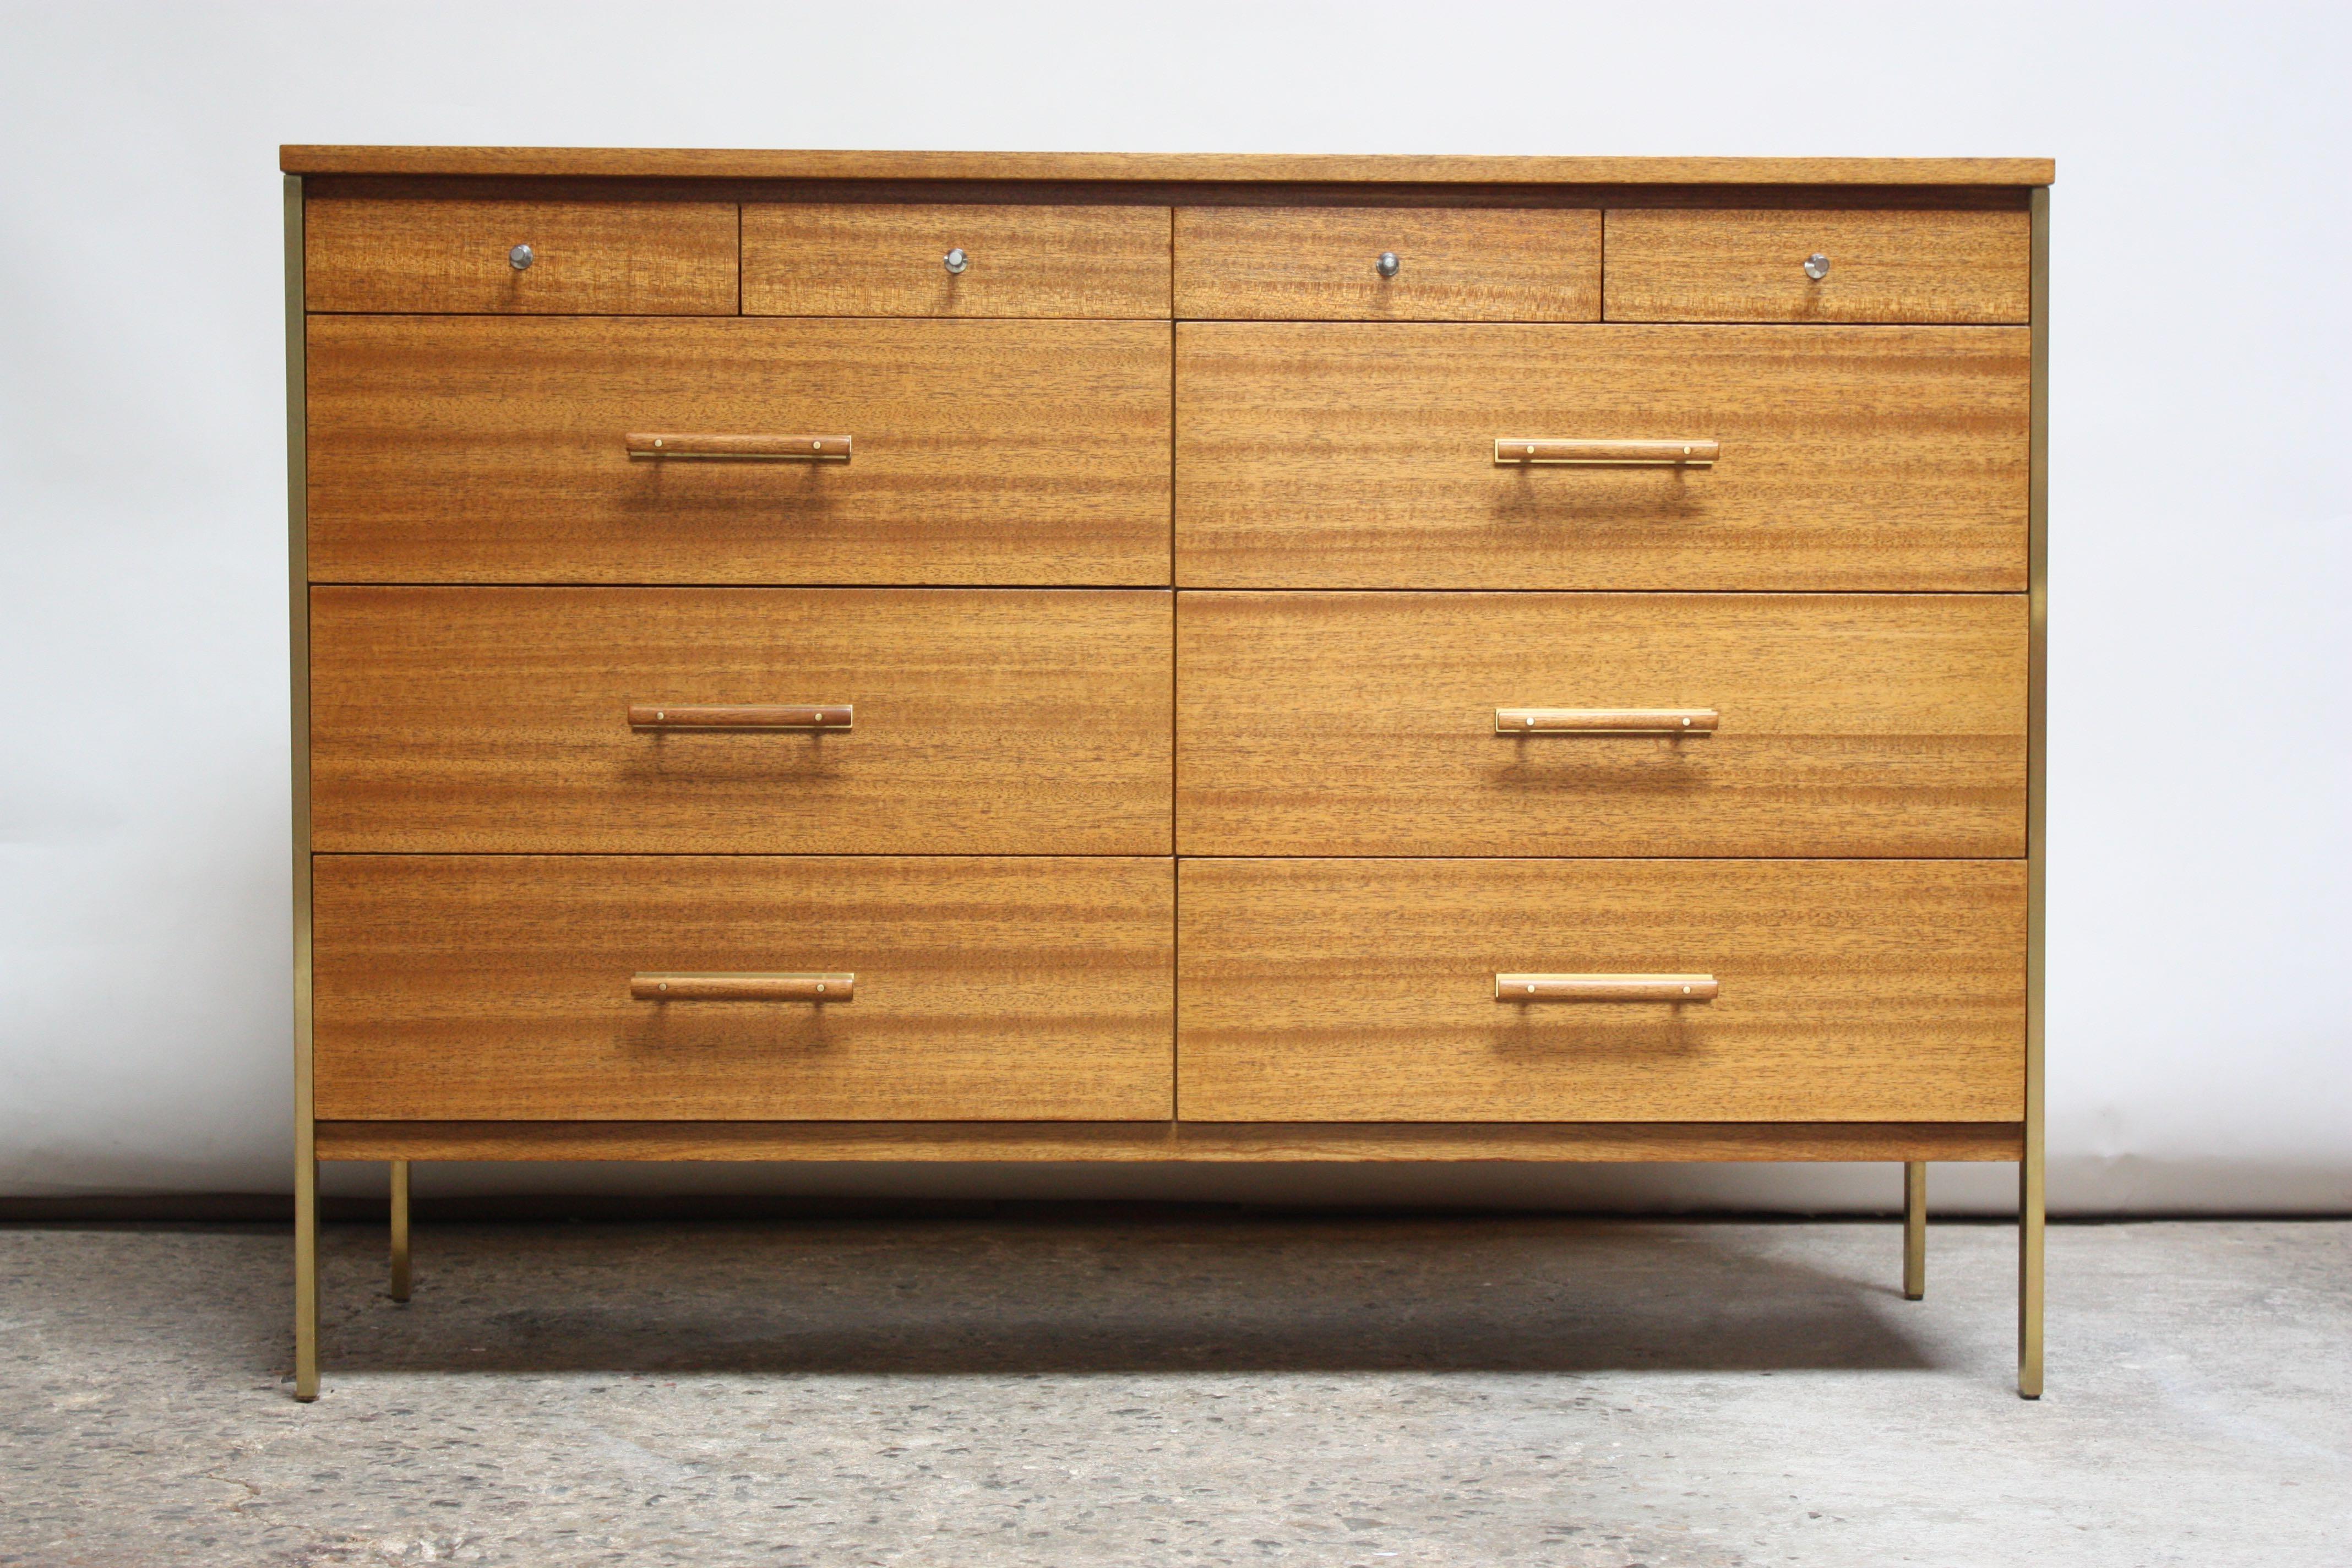 1957 Paul McCobb designed Directional chest for Calvin in bleached mahogany and brass. Despite its relatively diminutive size (48